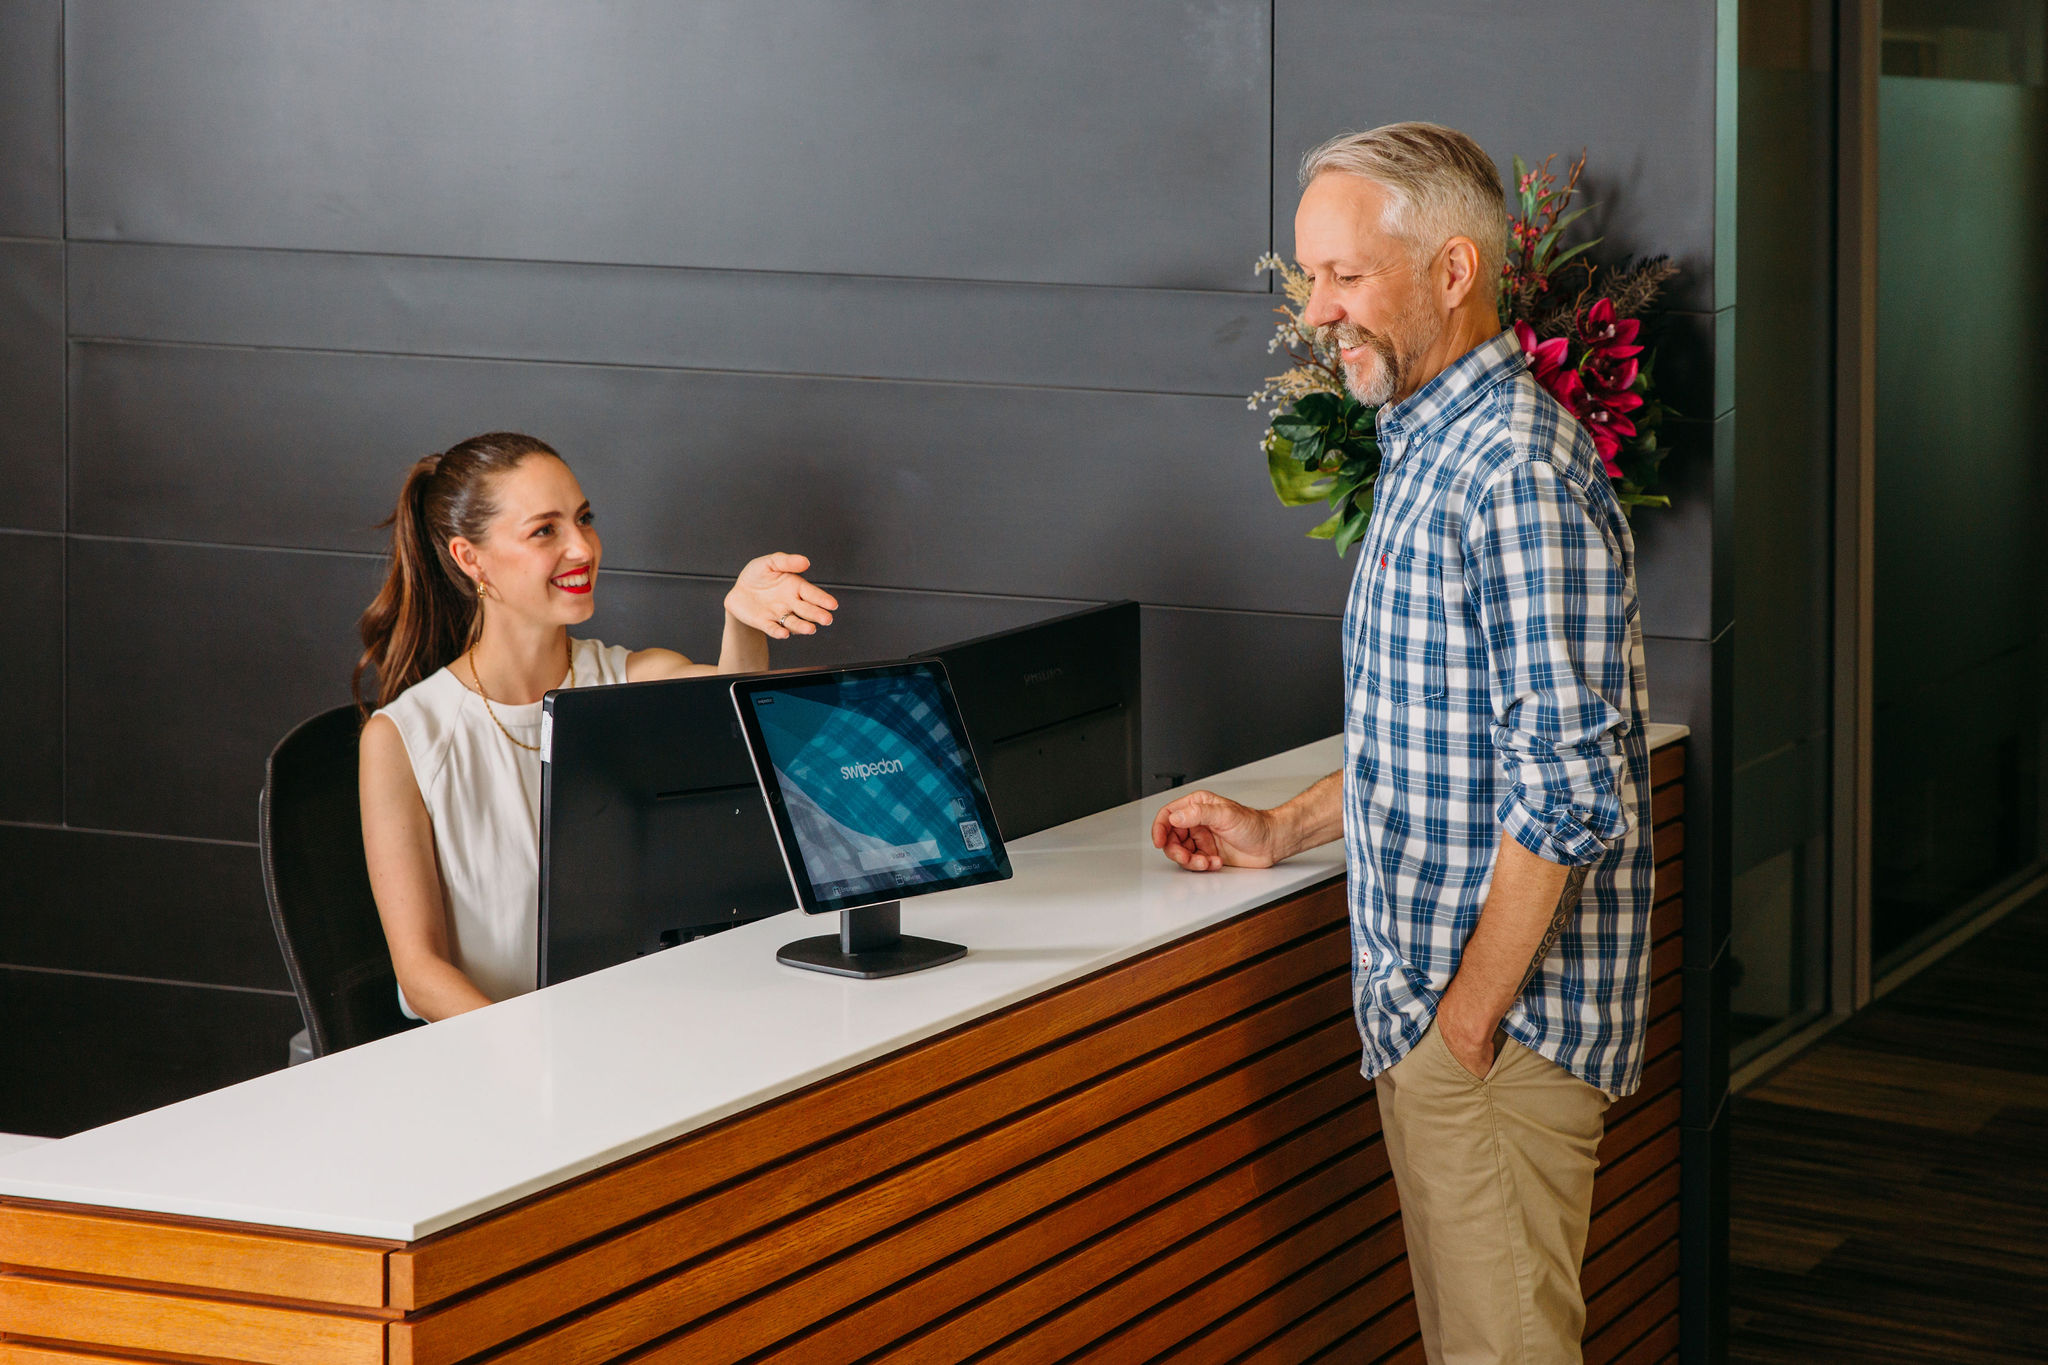 Make office visitors feel welcome: Train Your Receptionist to be Professional and Friendly